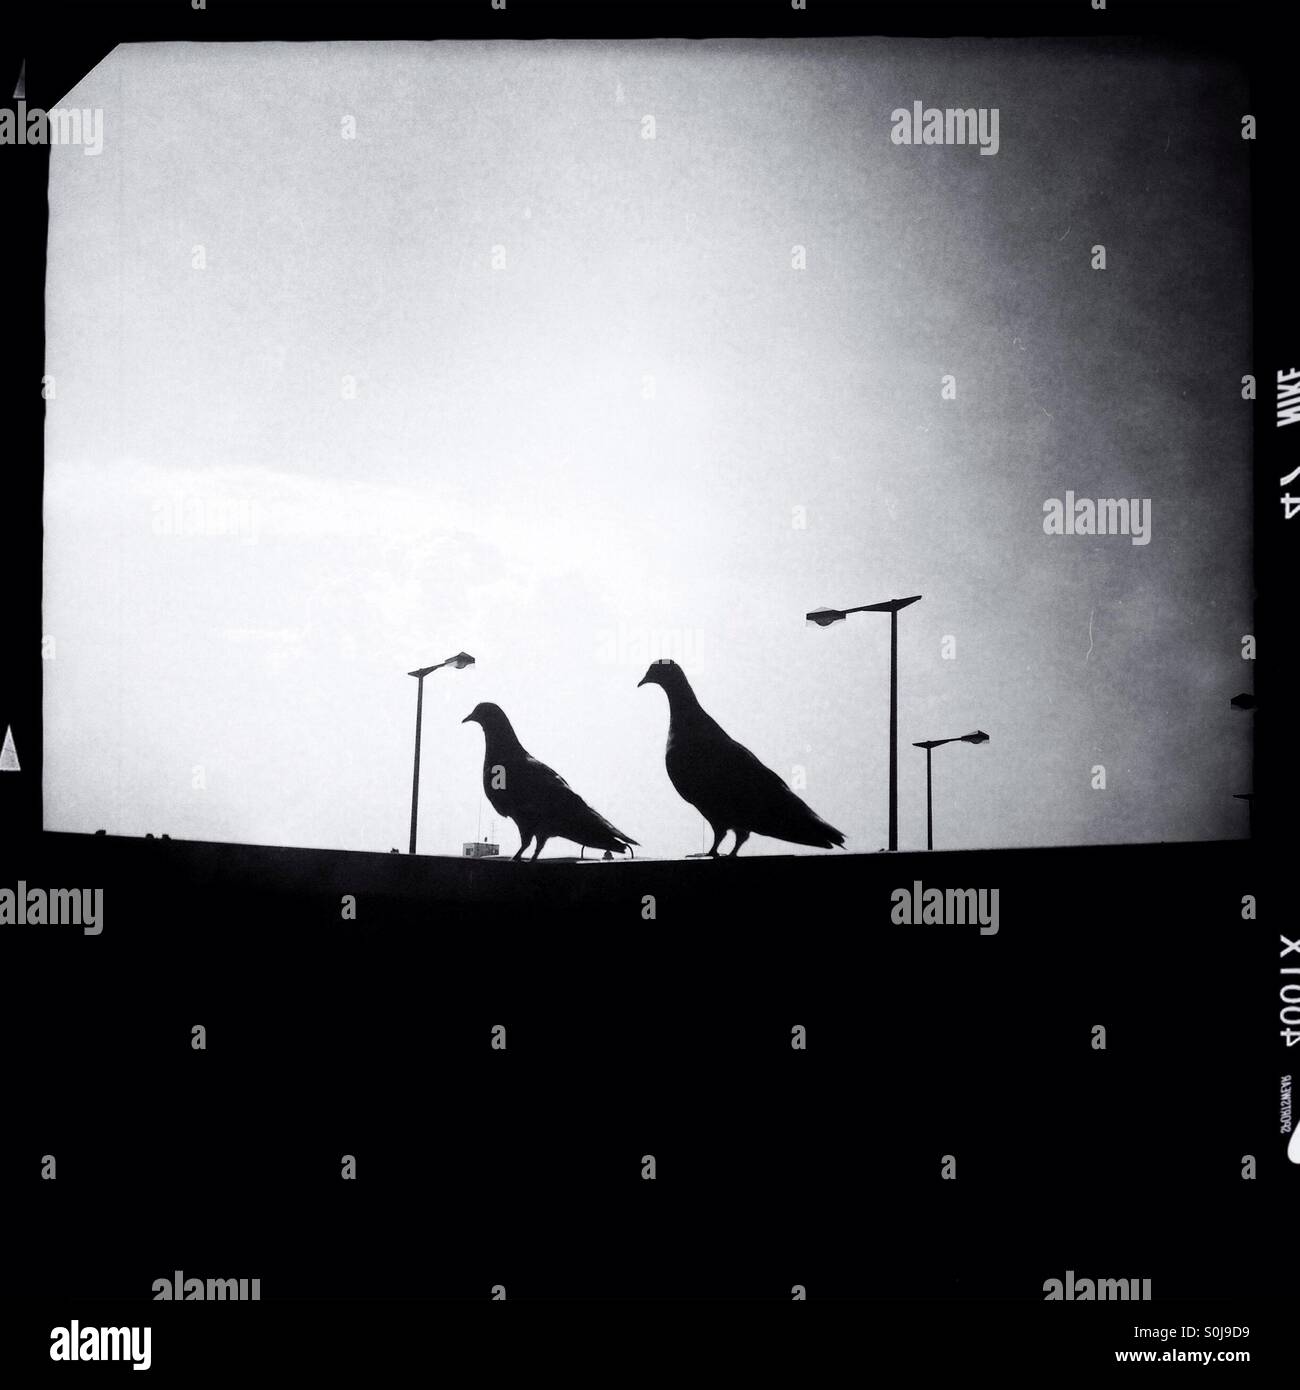 Silhouettes of pigeons Stock Photo - Alamy